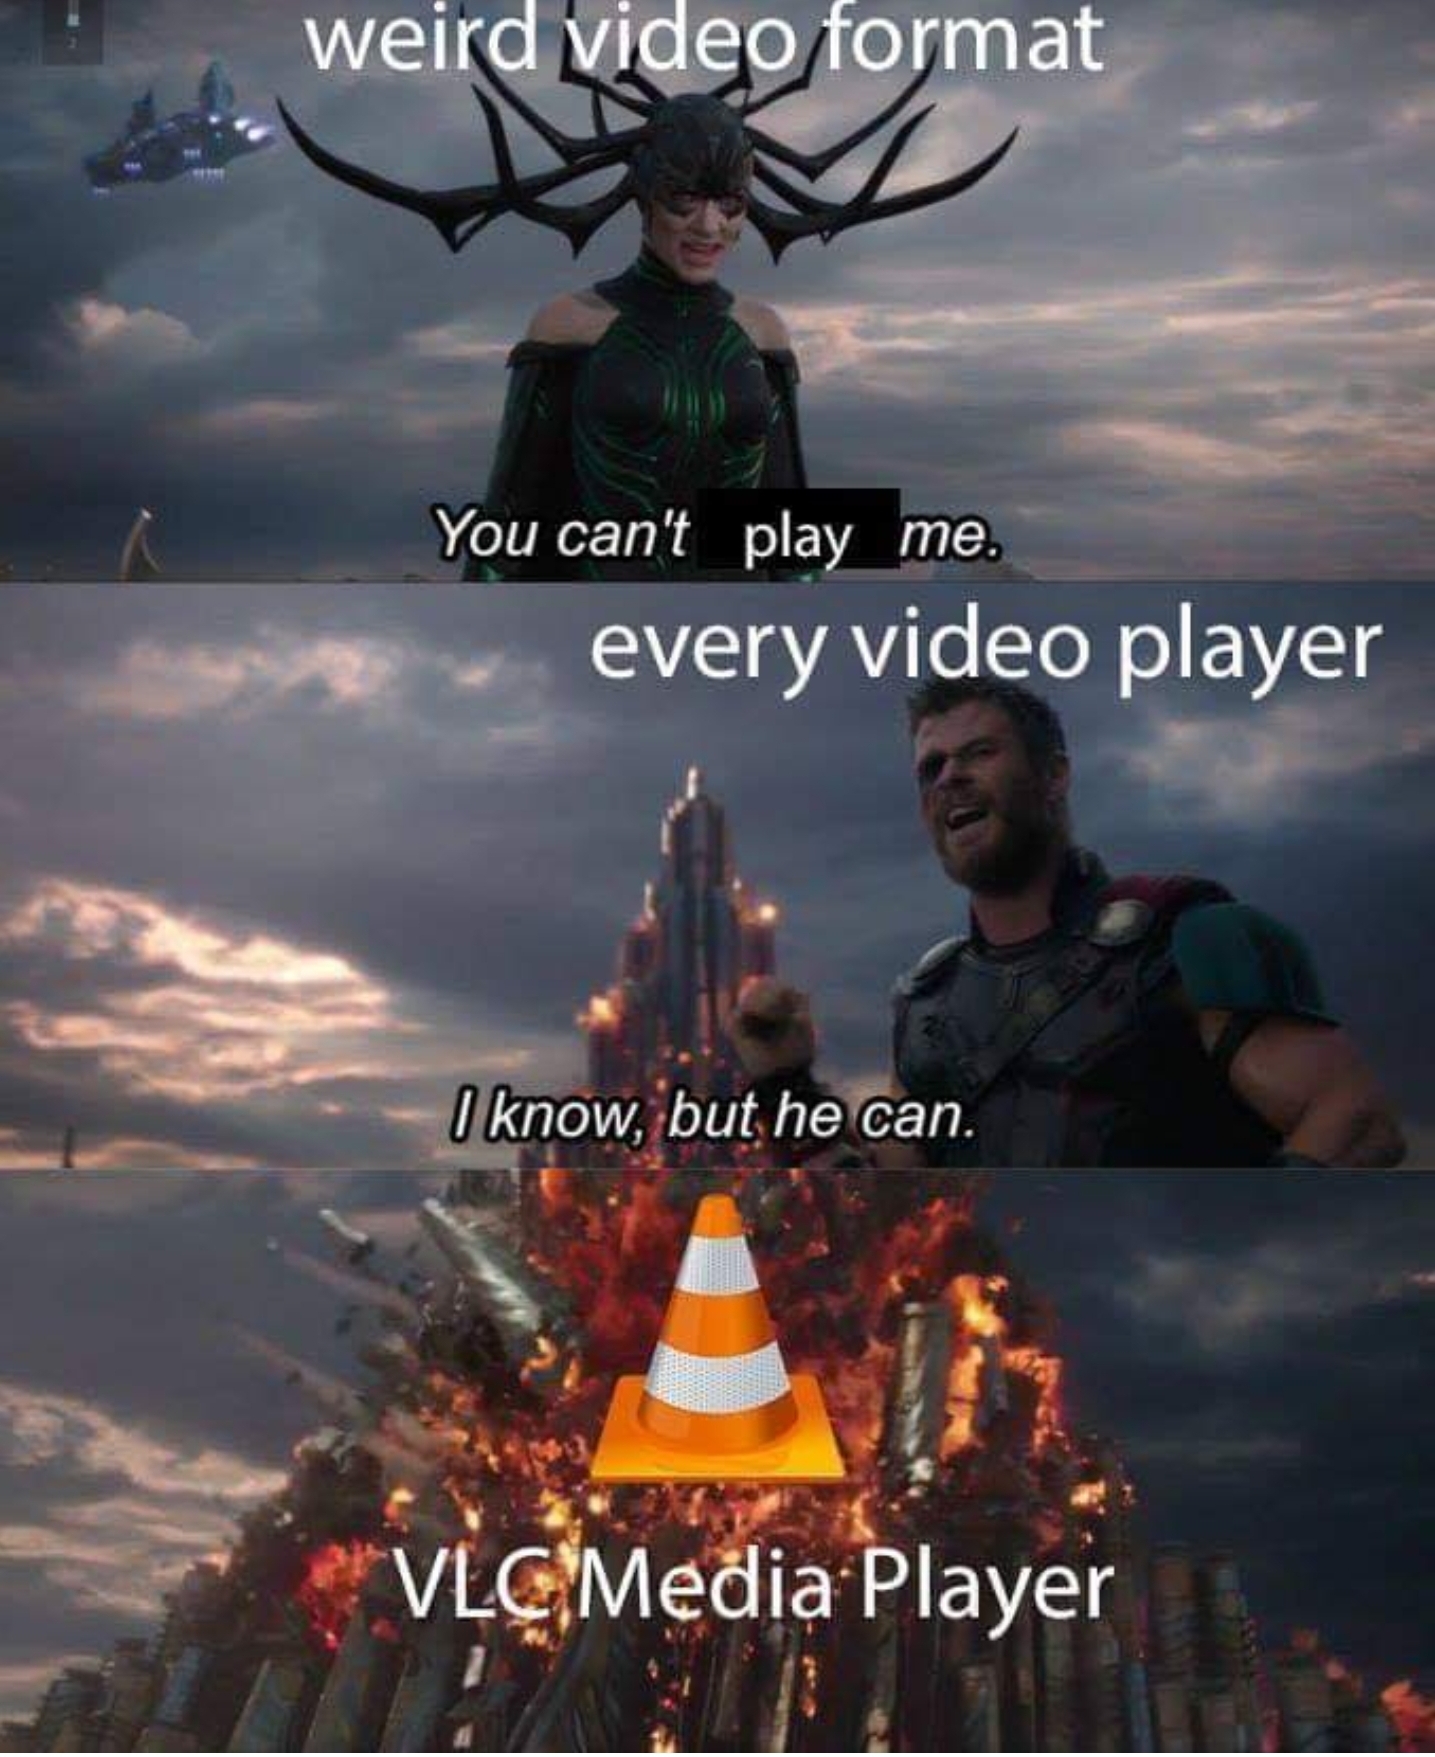 you can t defeat me template - weird video format You can't play me. every video player I know, but he can. Vlc Media Player